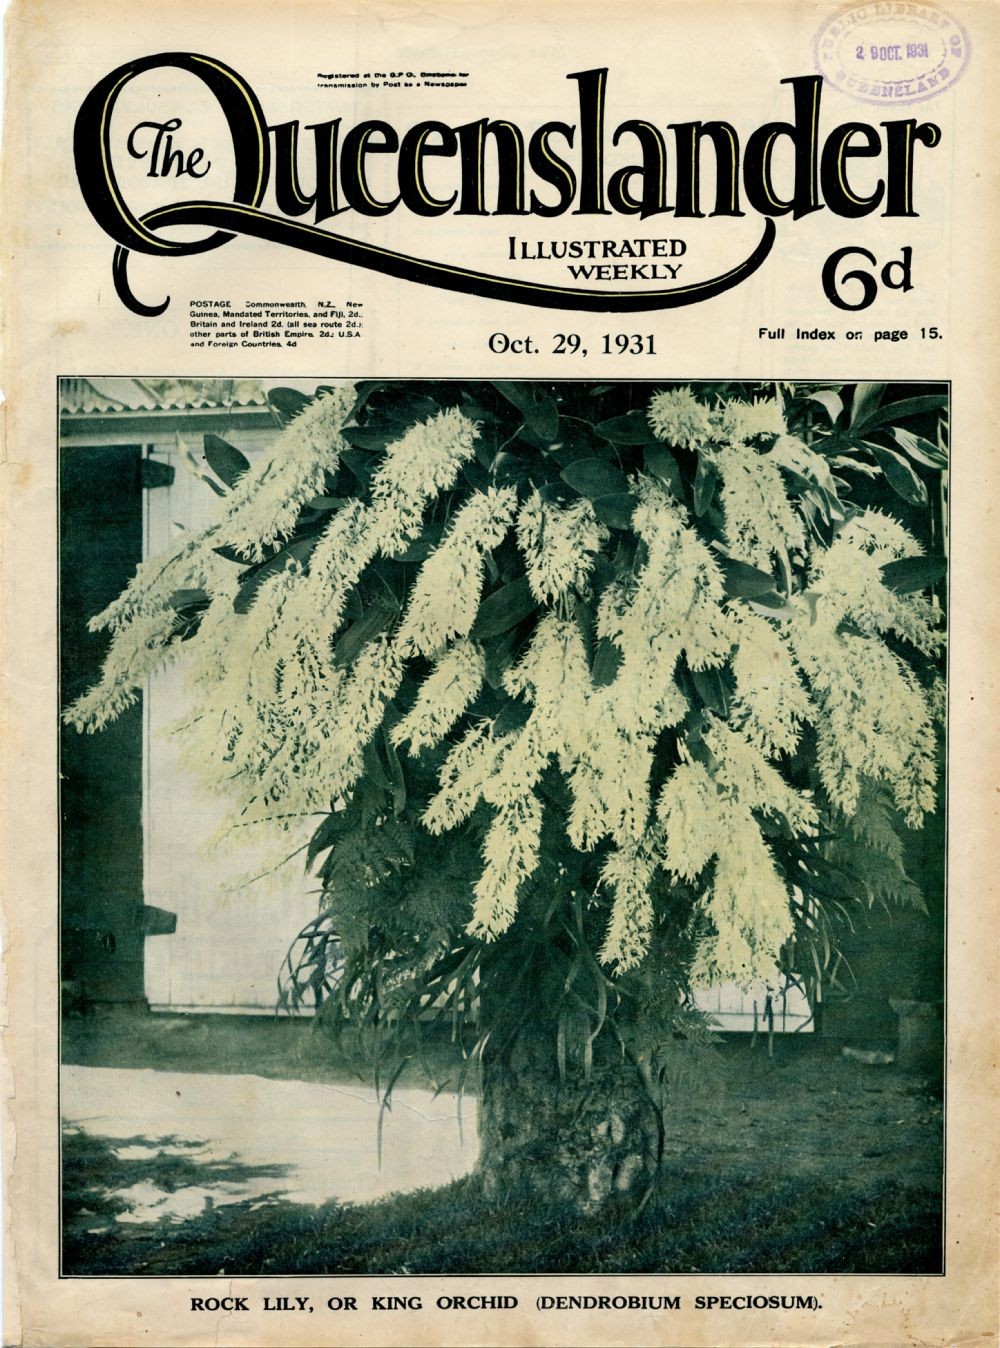 Illustrated front cover from The Queenslander, October 29, 1931.